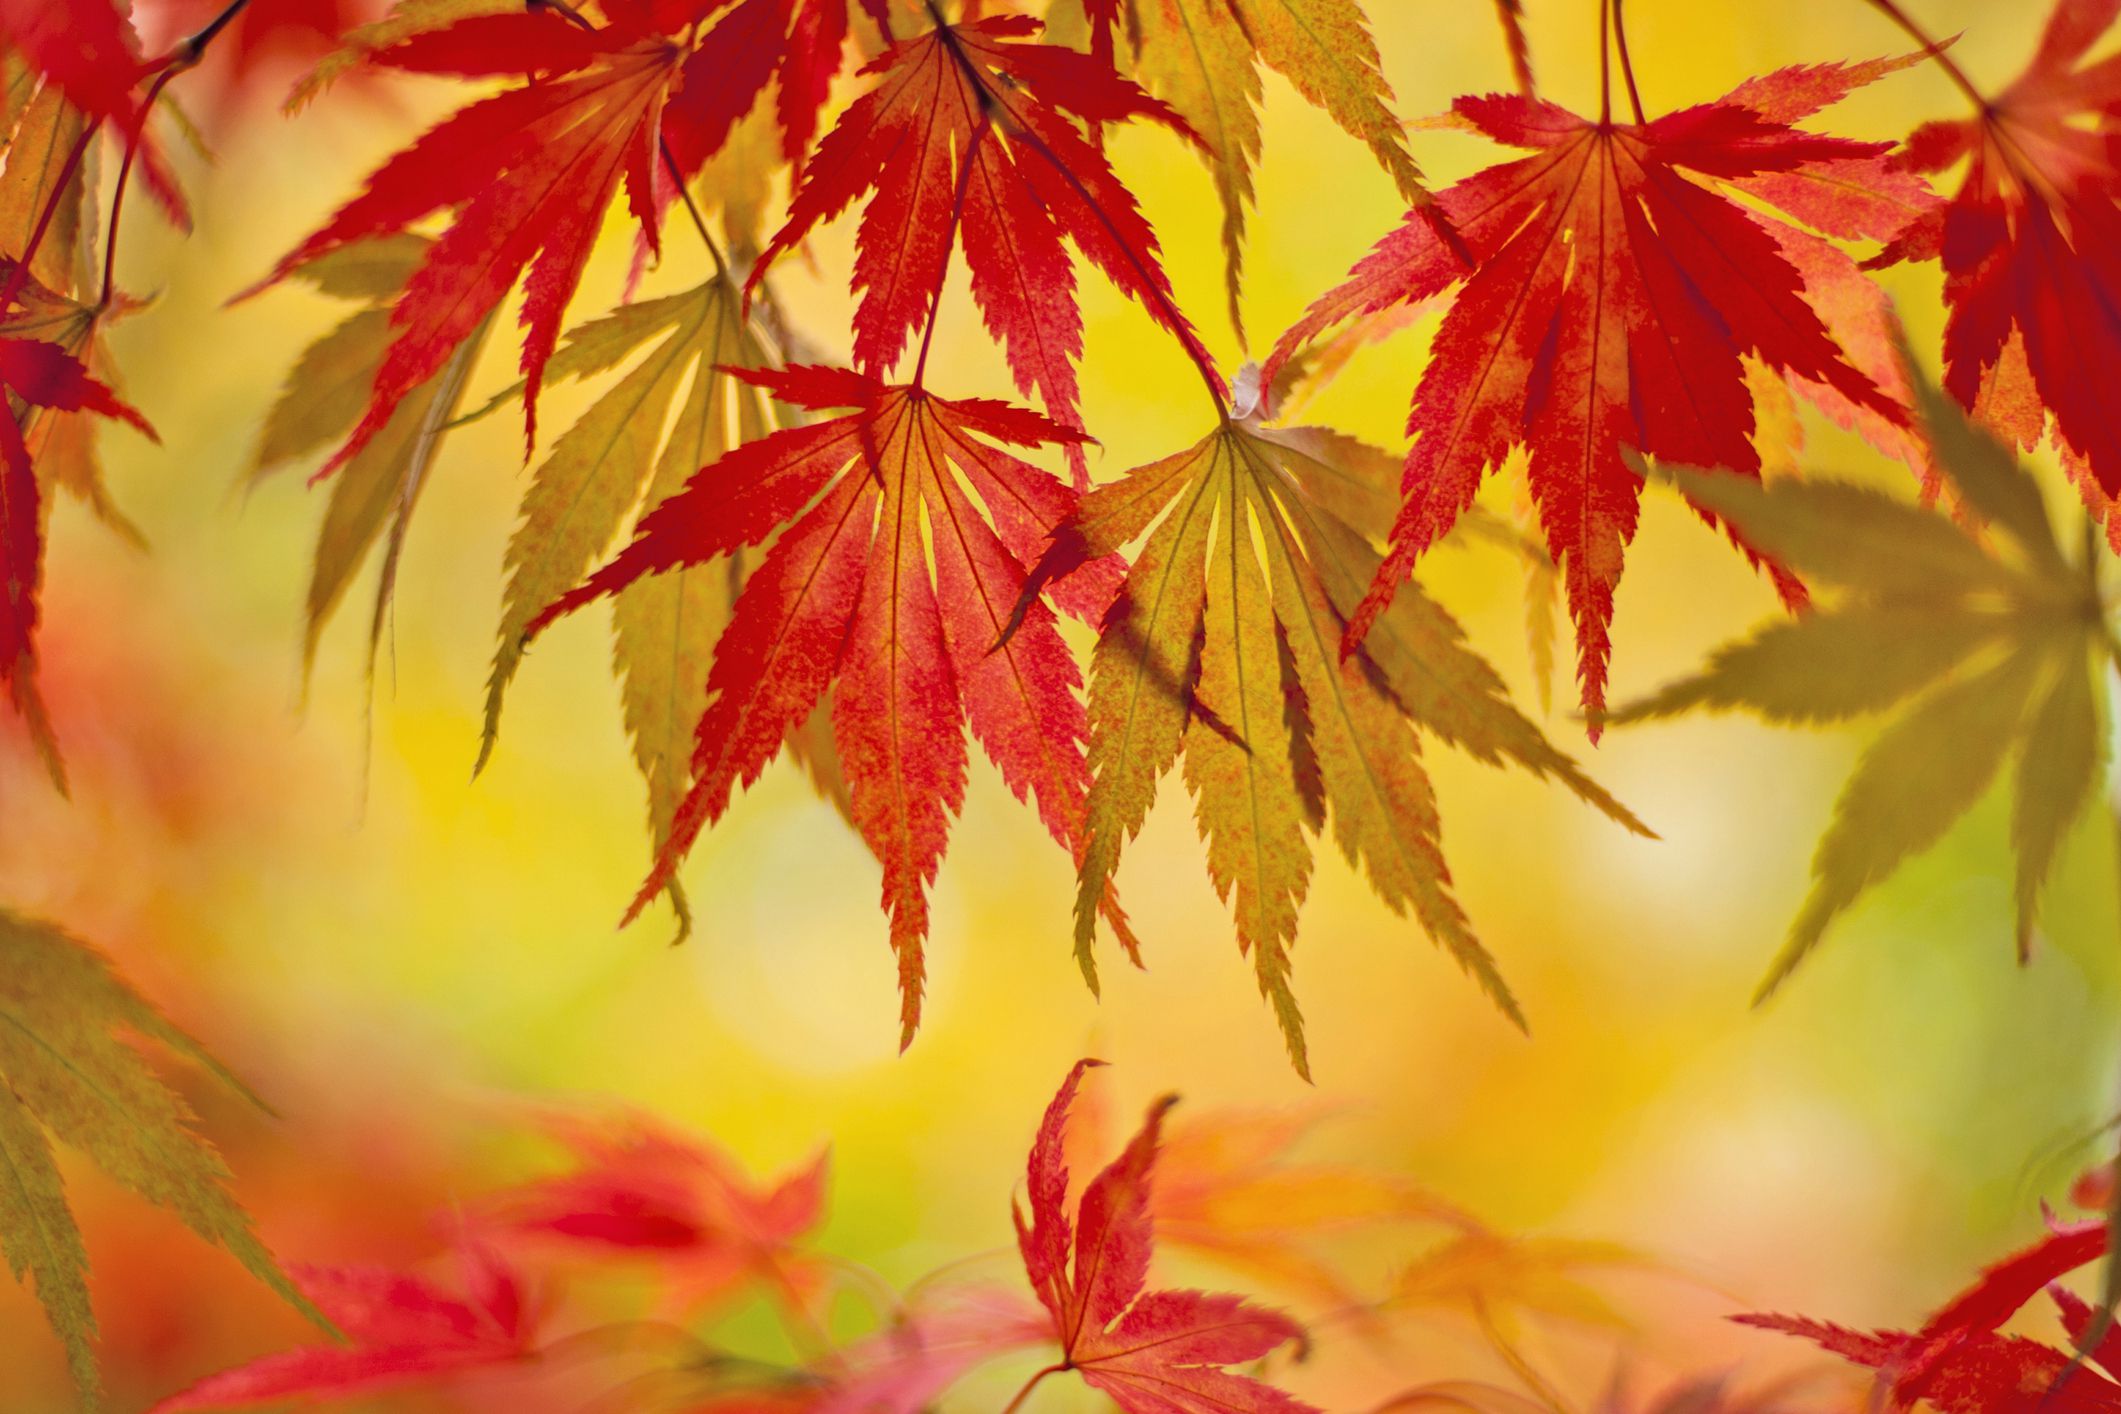 How to Protect Japanese Maple Trees from Winter Damage